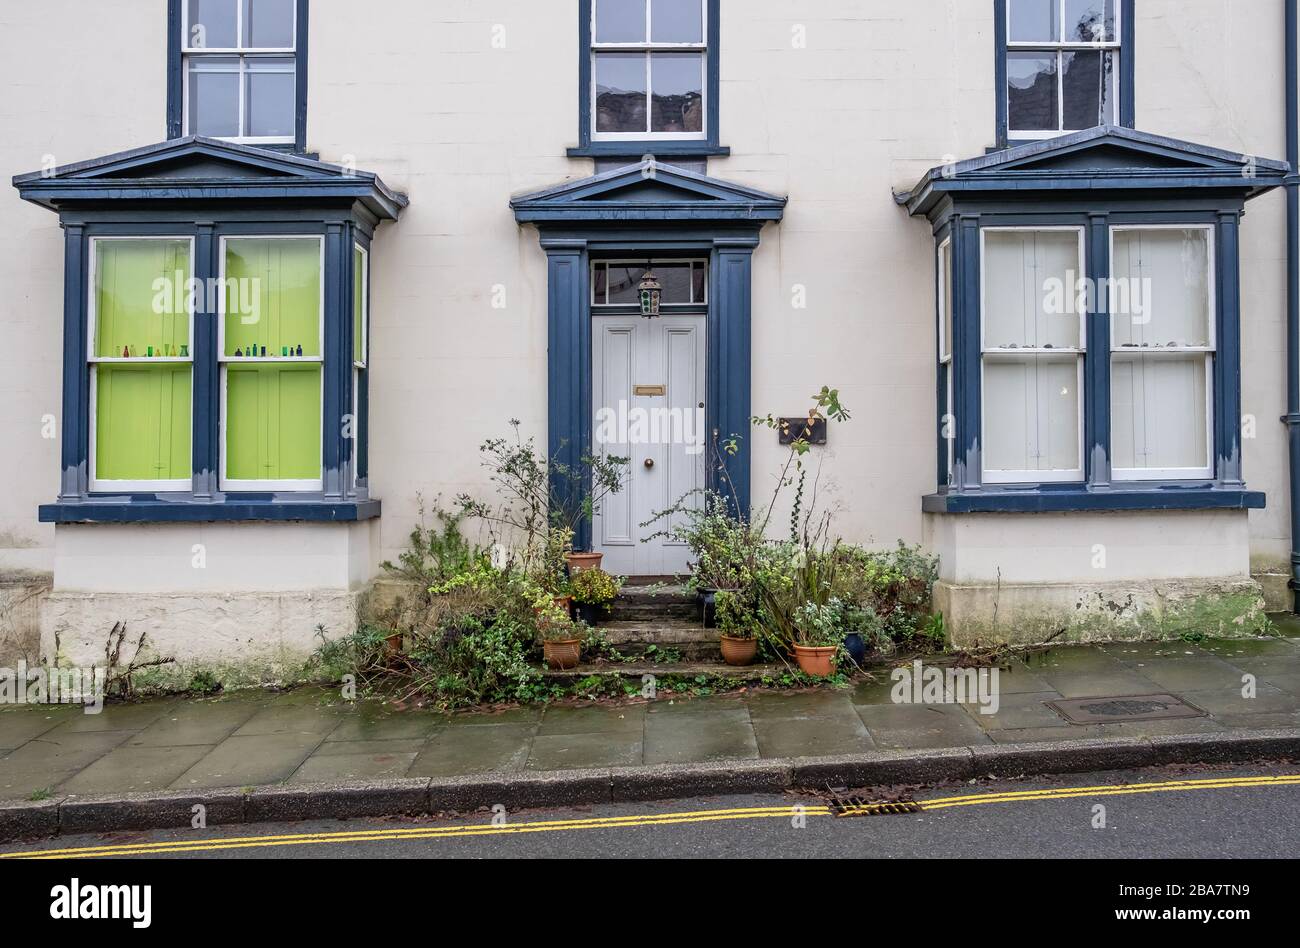 Symmetrical house front with bay windows and sash windows Stock Photo